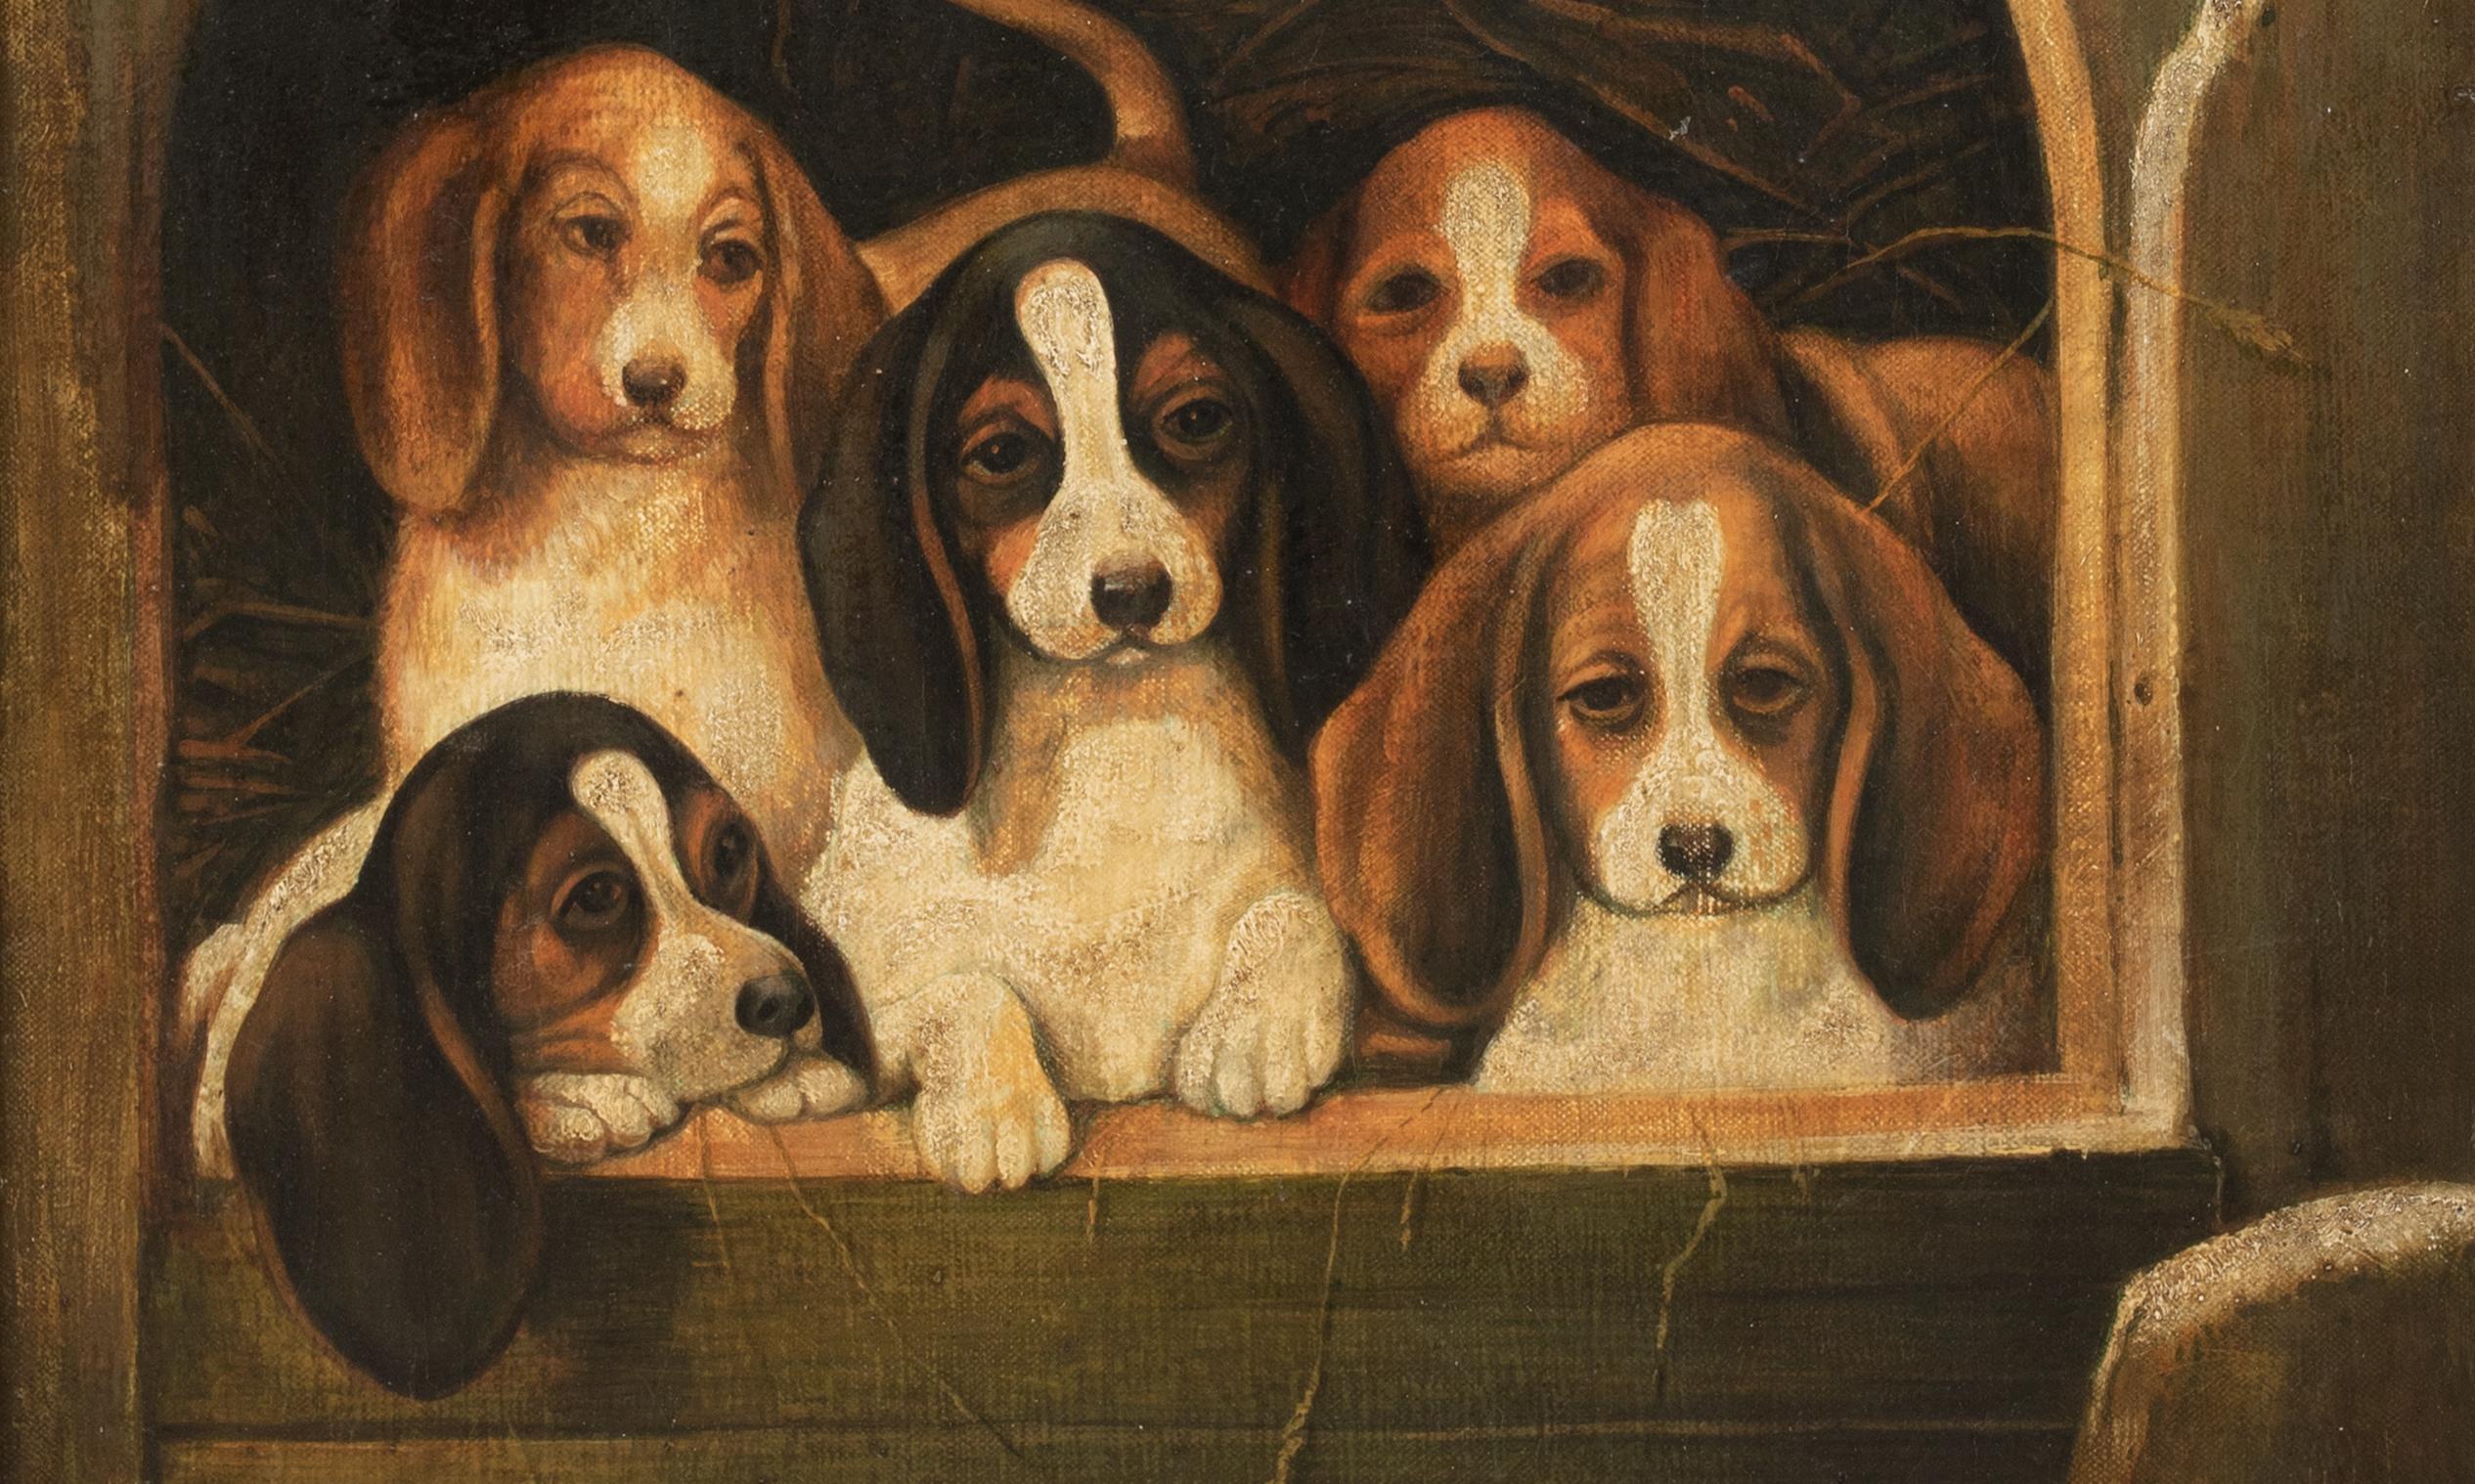 Beagle Puppies In A Kennel, 19th Century

English School

Large 19th Century portrait of Beagle puppies in a kennel, oil on canvas. Good quality and condition circa 1880 kennel scene of a pack of Beagle puppies. Presented in an antique gilt